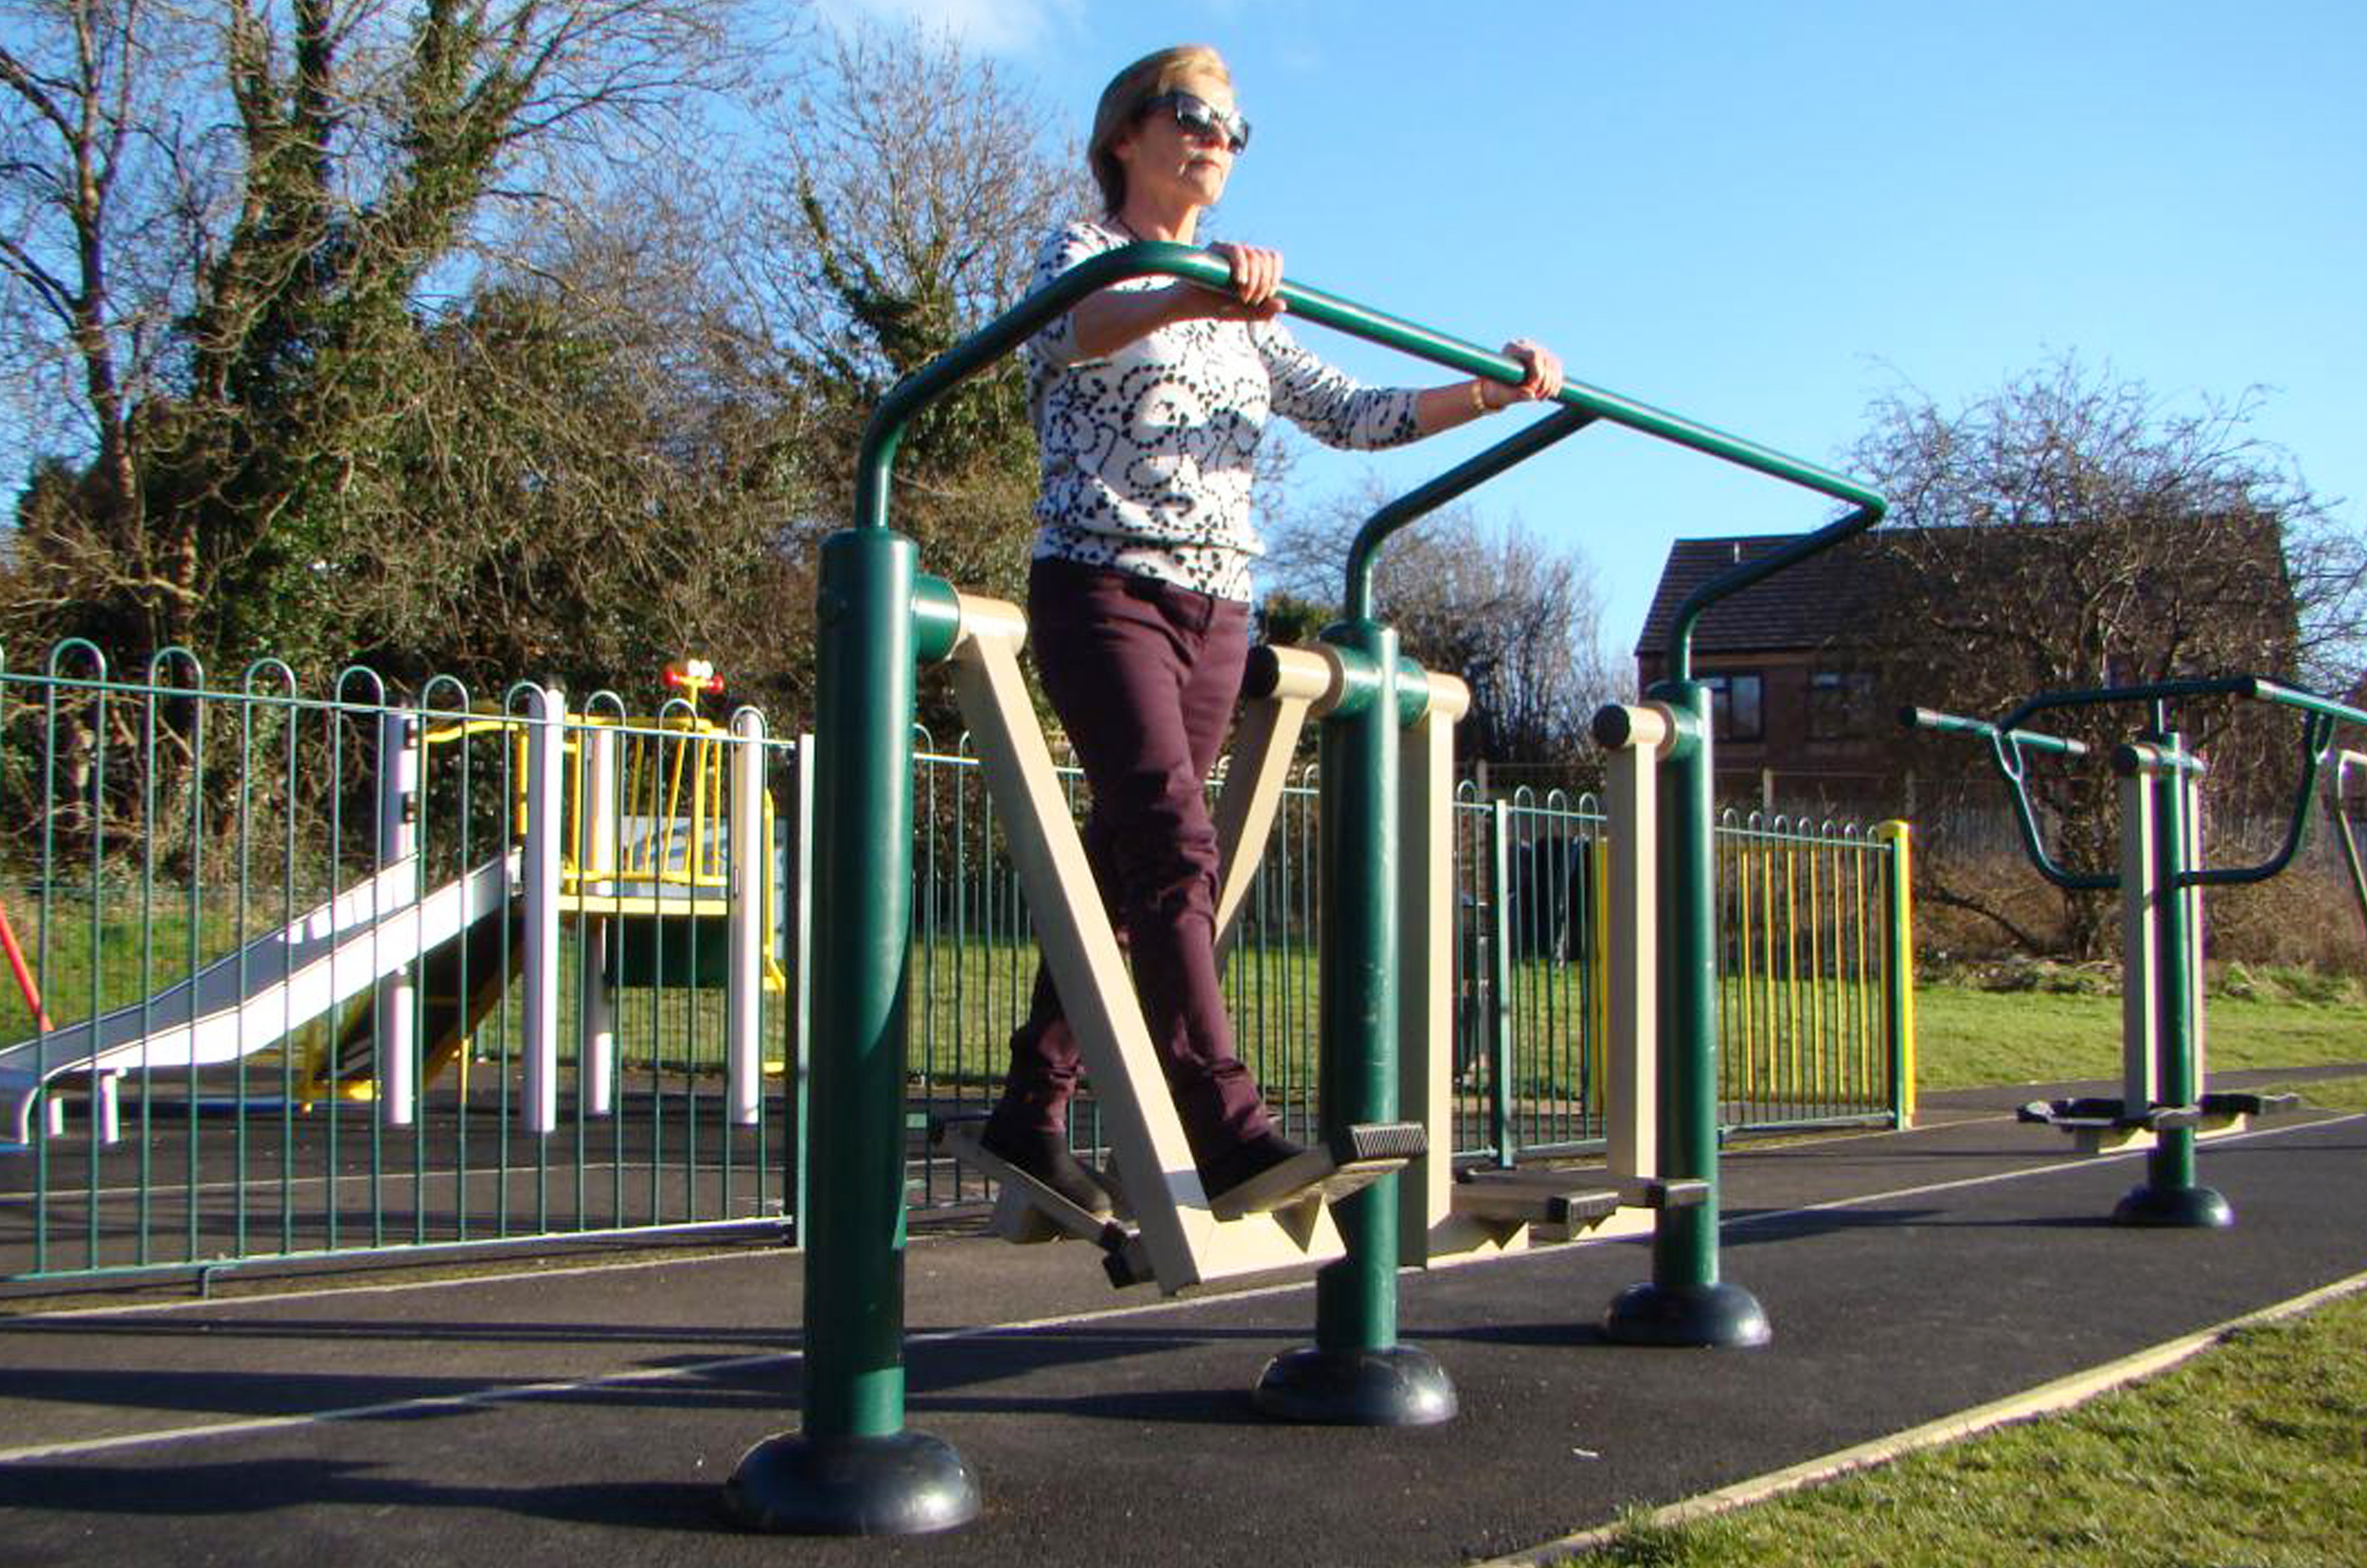 A lady uses one side of the double health walker, her legs are astride in the motion of walking whilst holding on to the support hand rail, the walking motion helps with flexibility in her joints